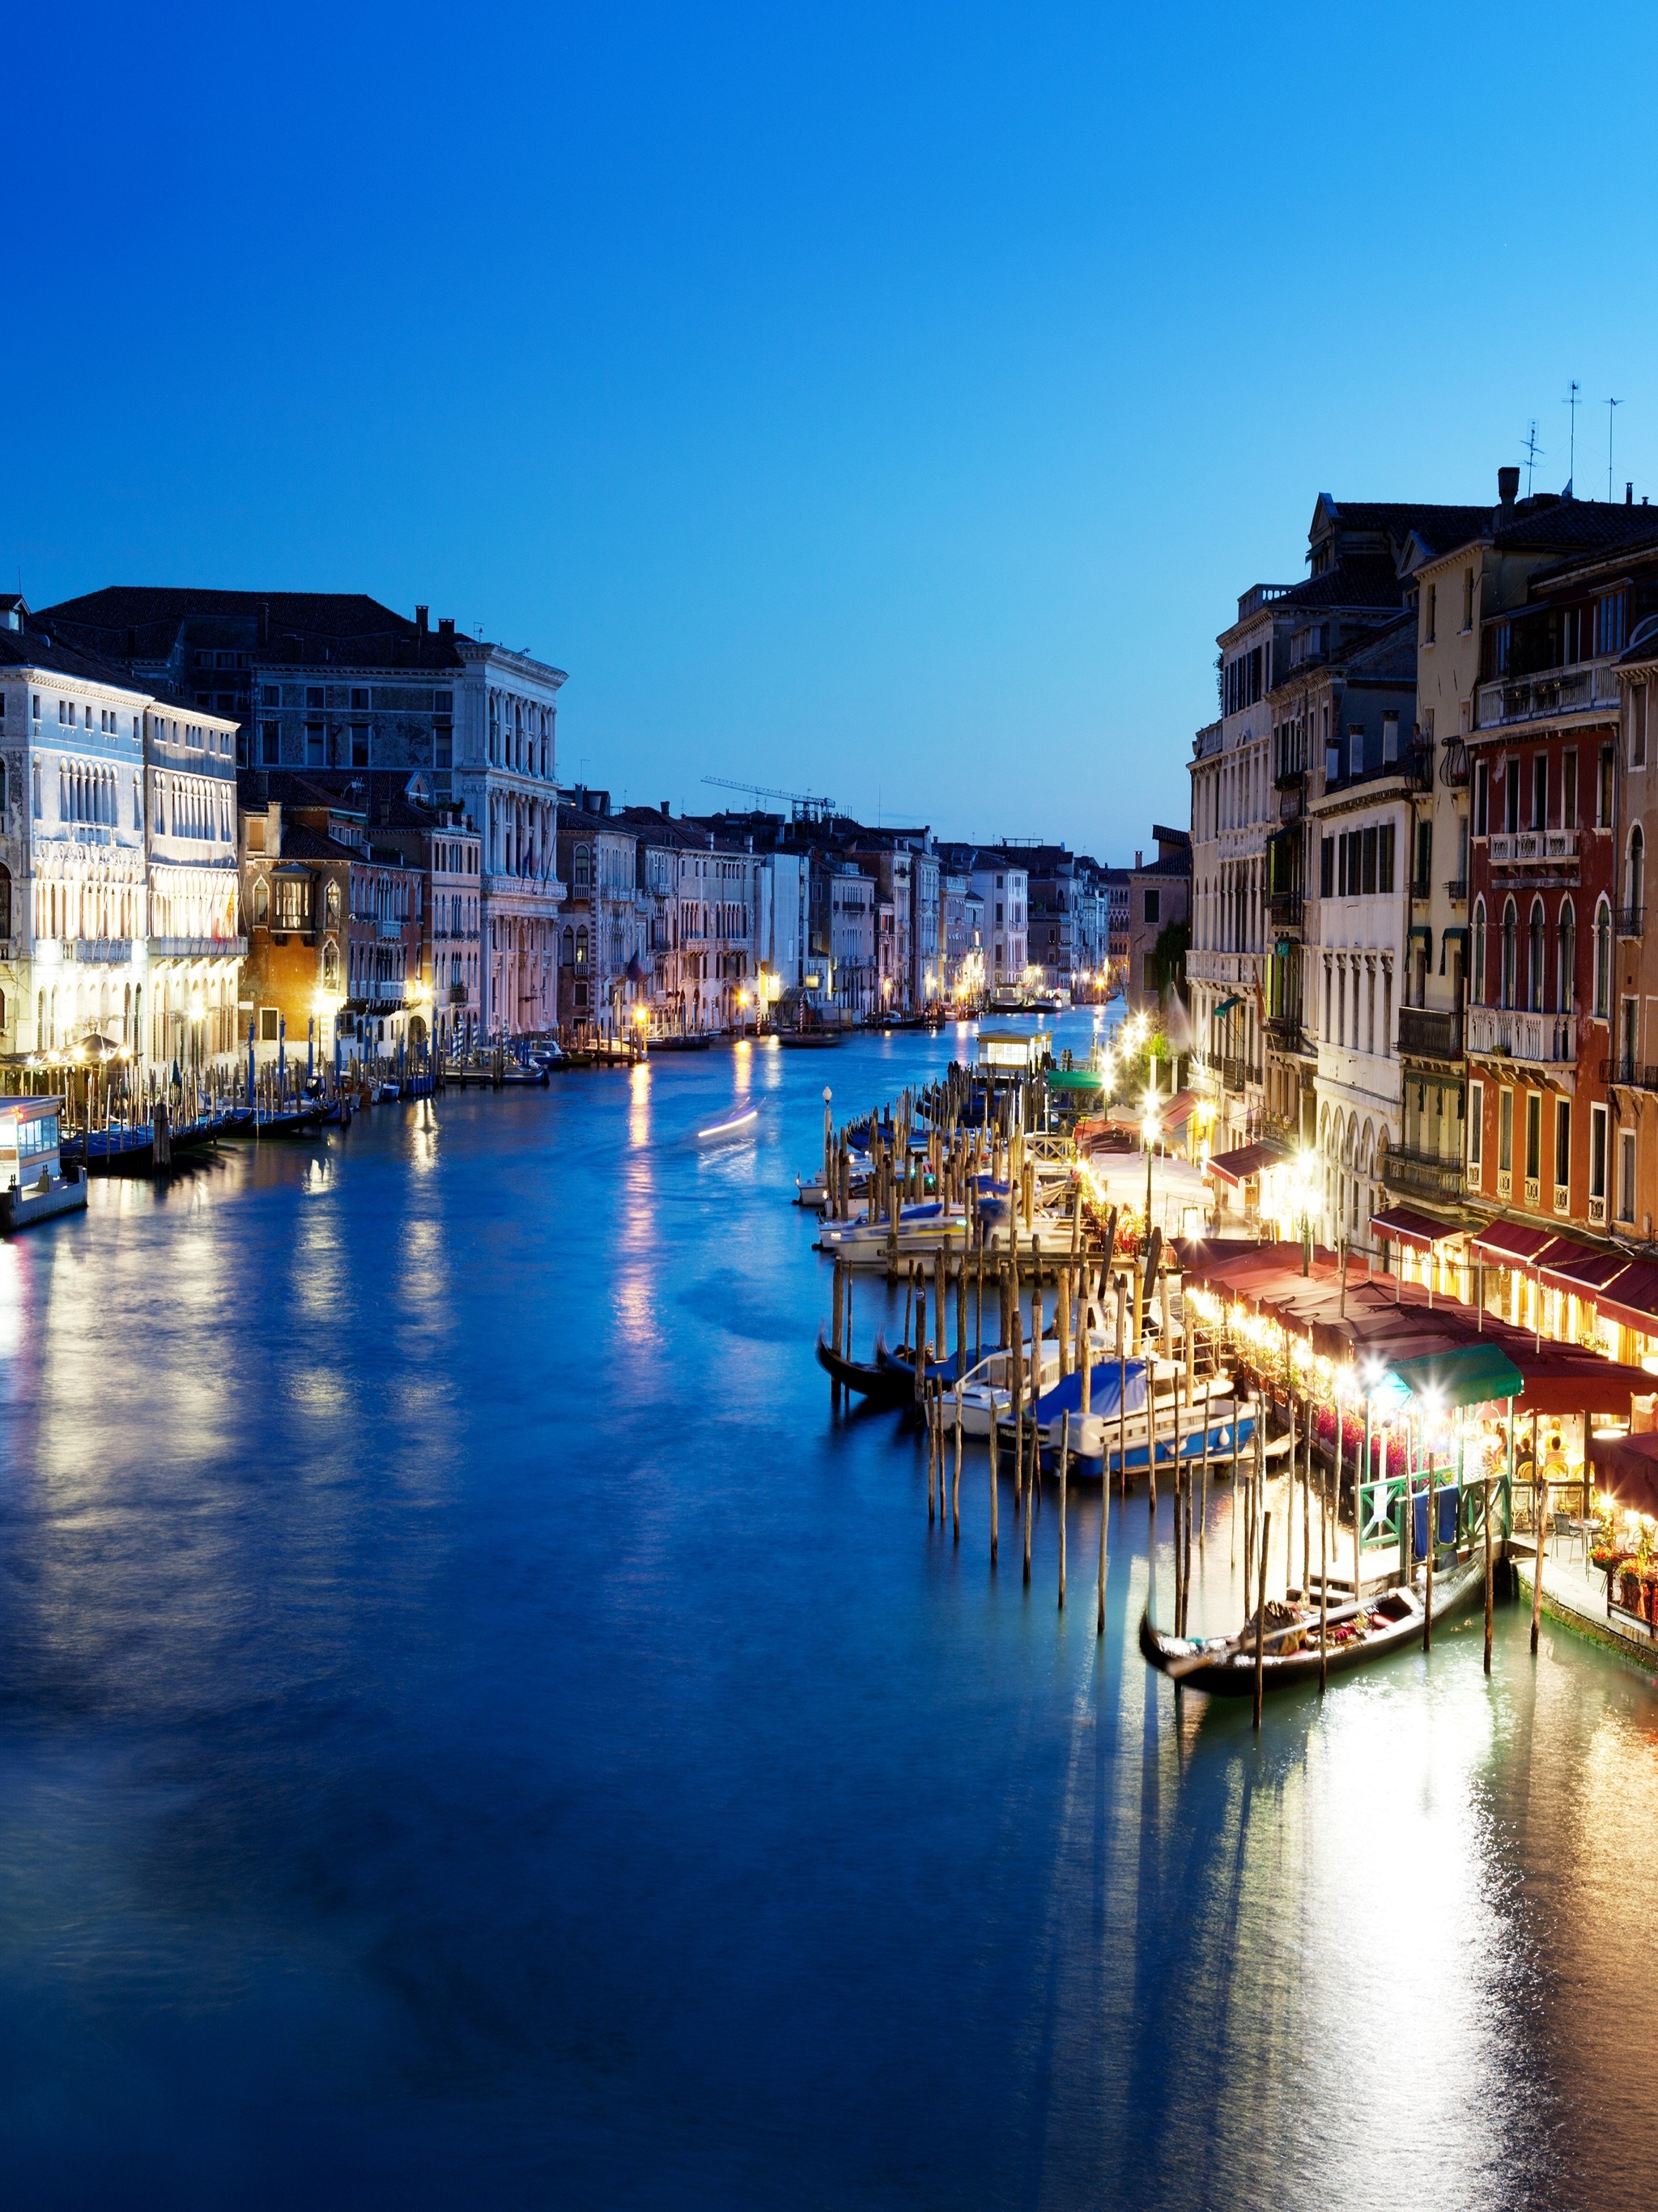 Grand Canal Venice for Apple iPad Pro resolution